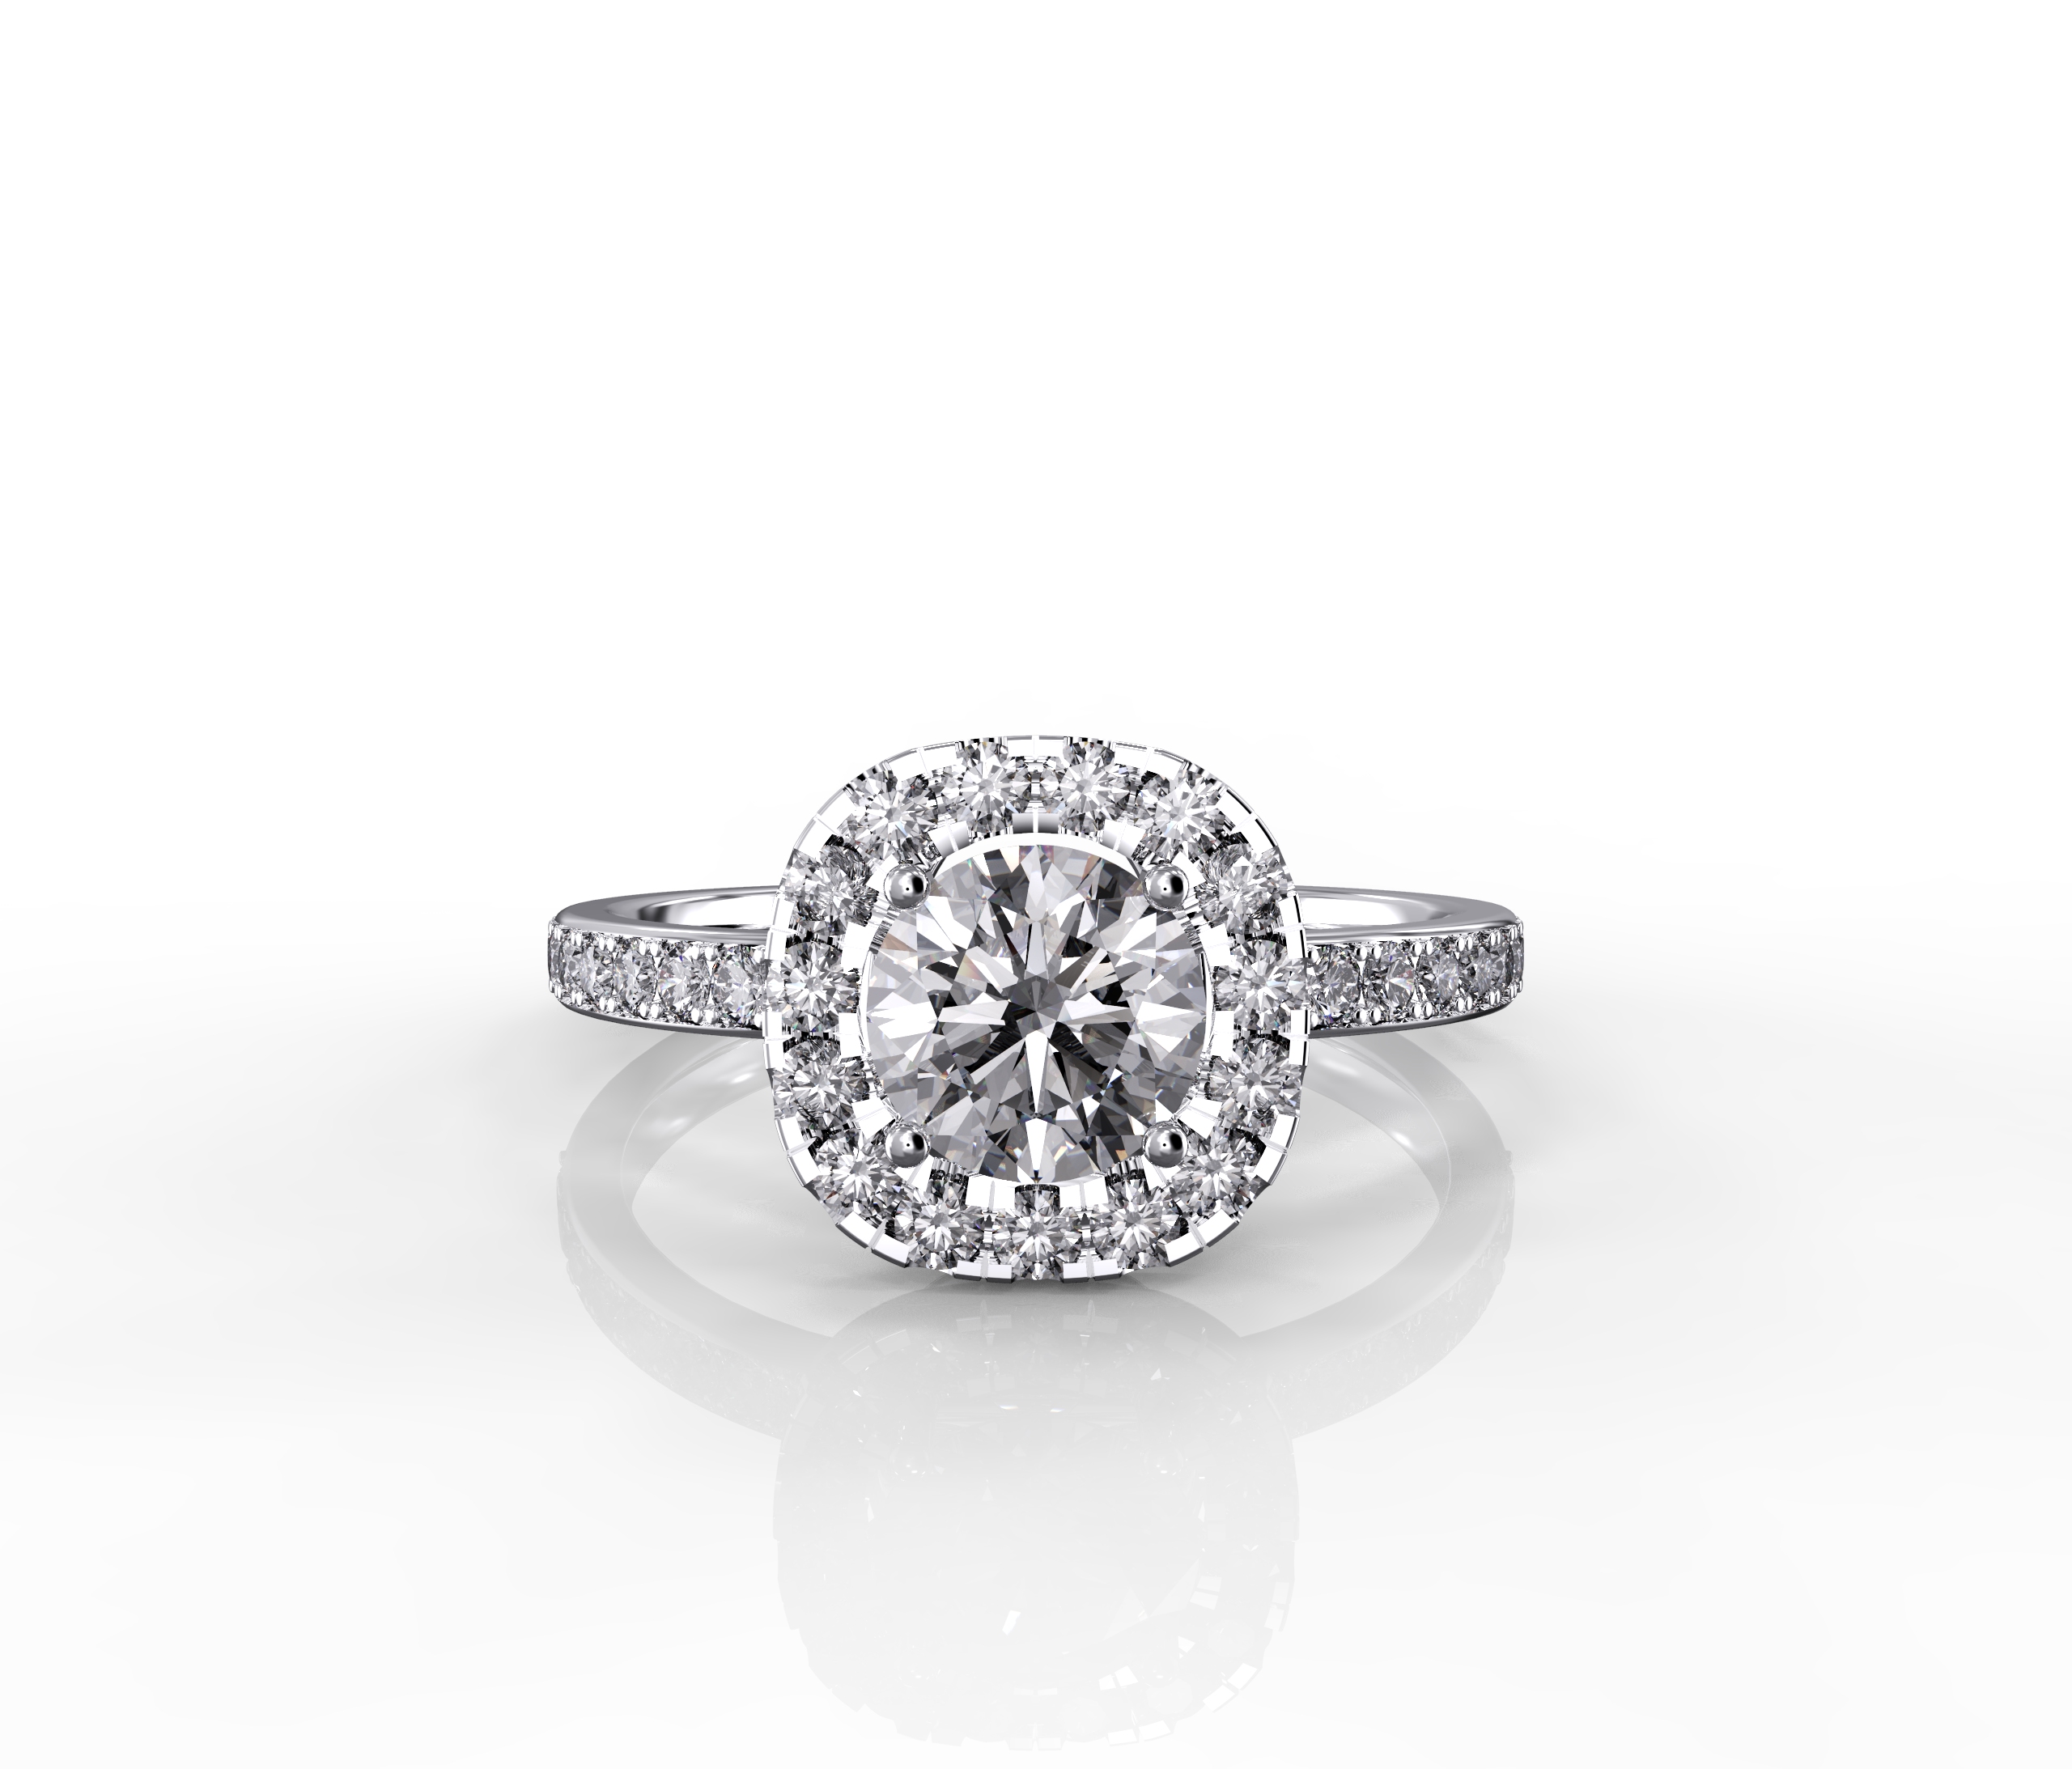 Front View of Halo Cushion Pave Diamond Ring